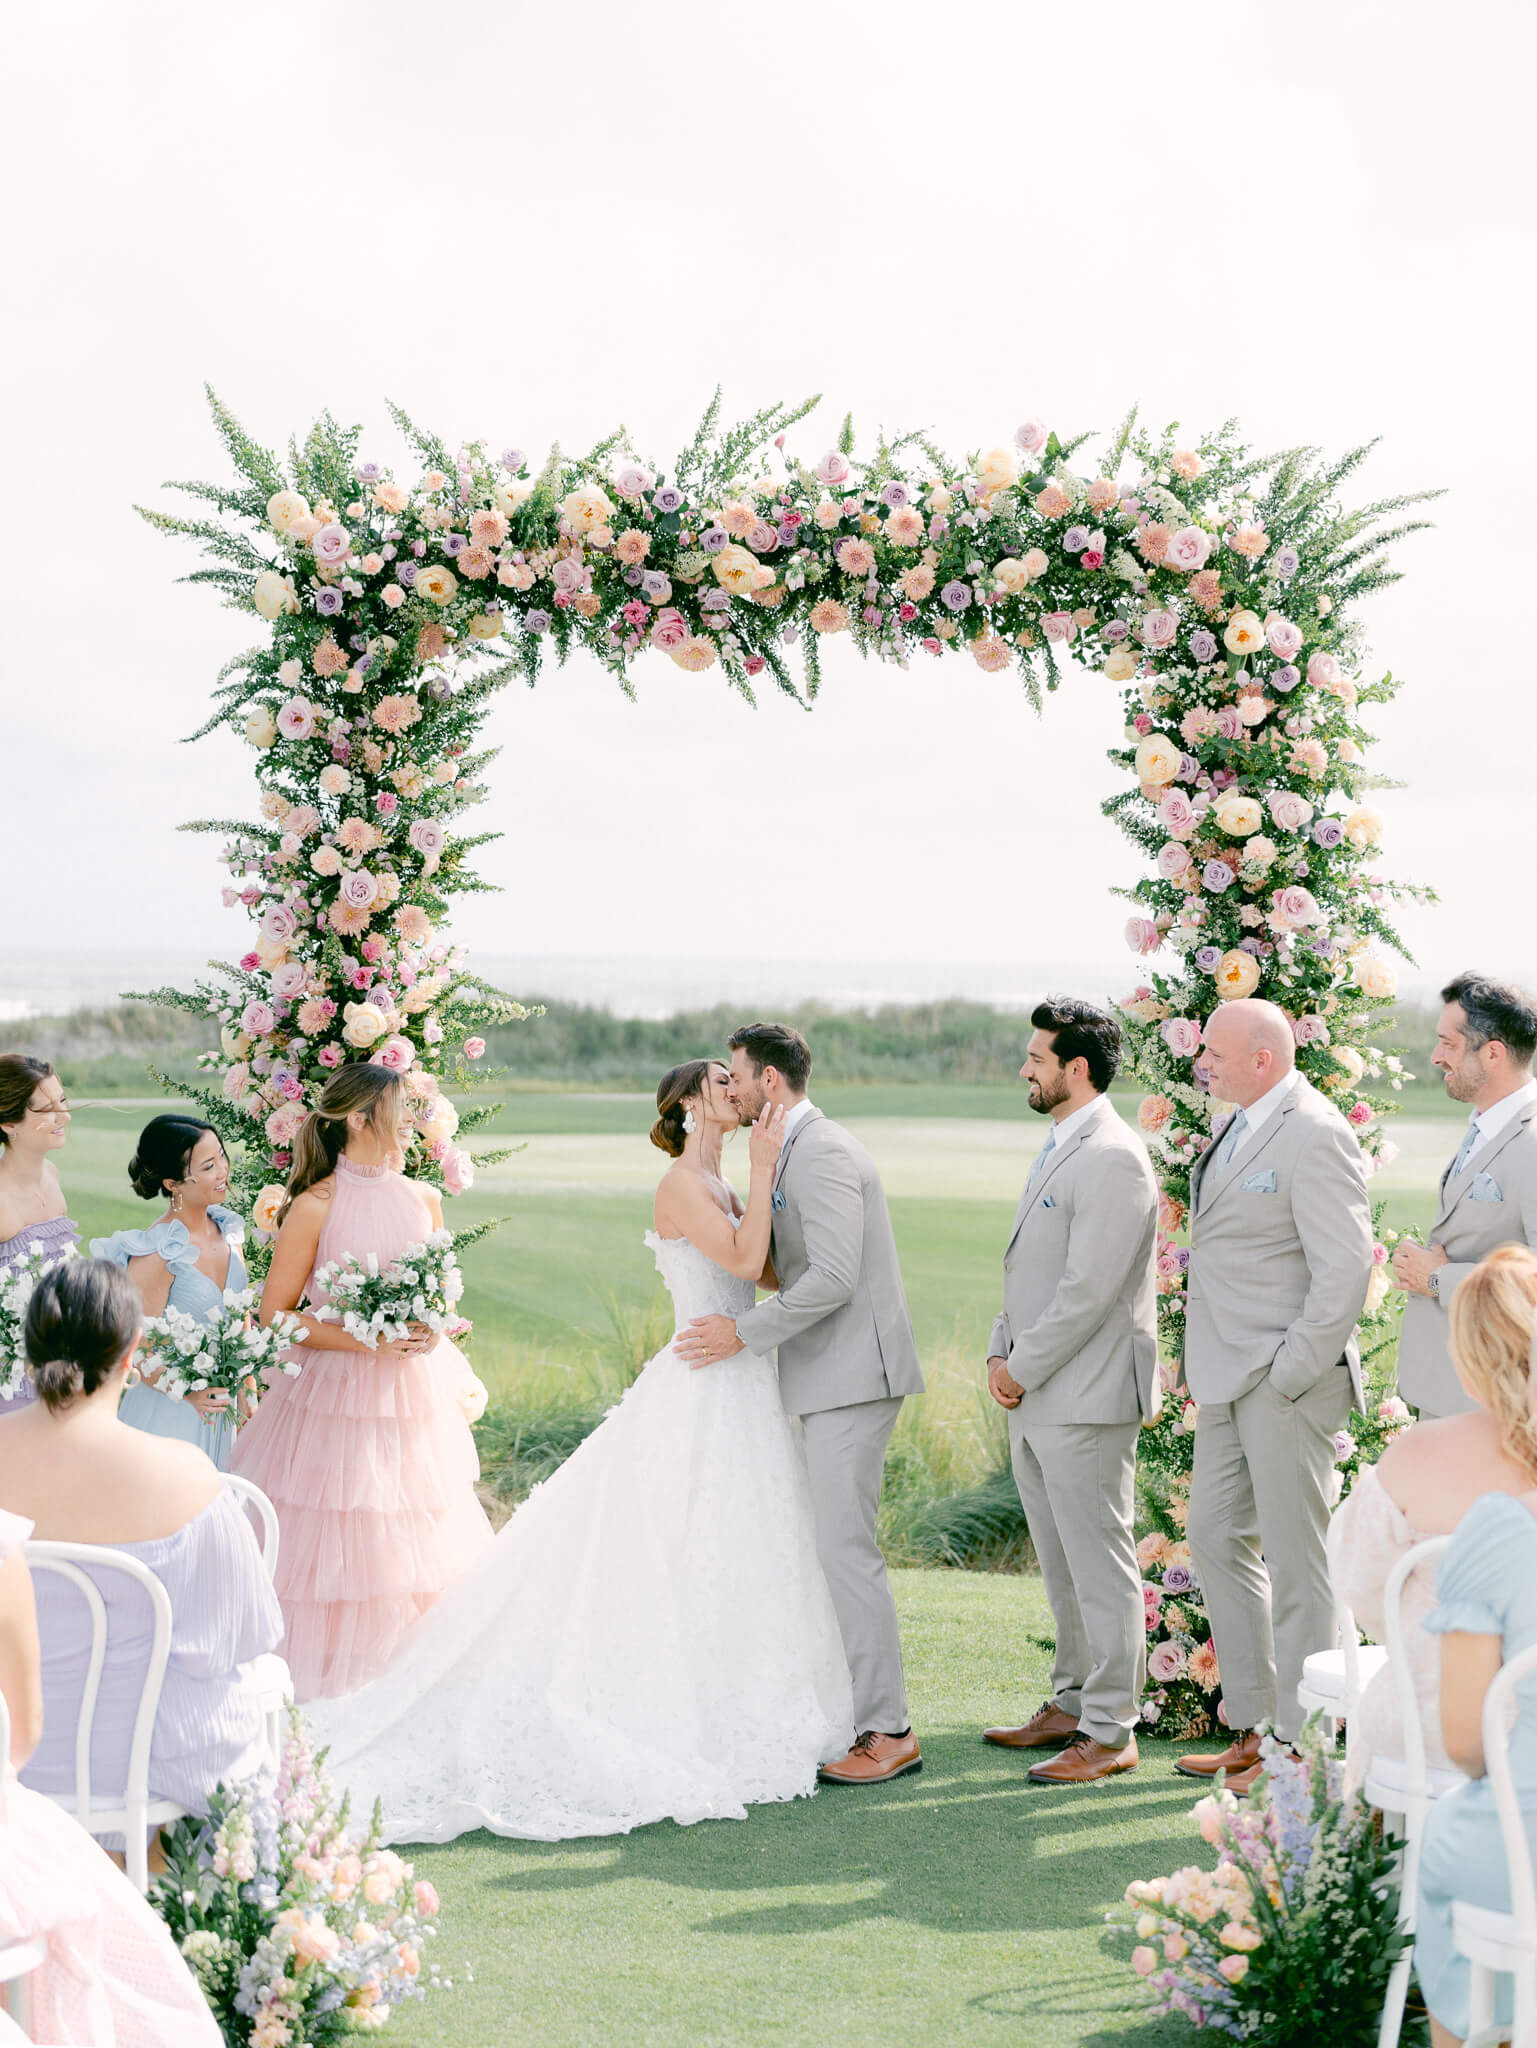 A bride and groom kissing for the first time in front of their guests under a large square floral arch.